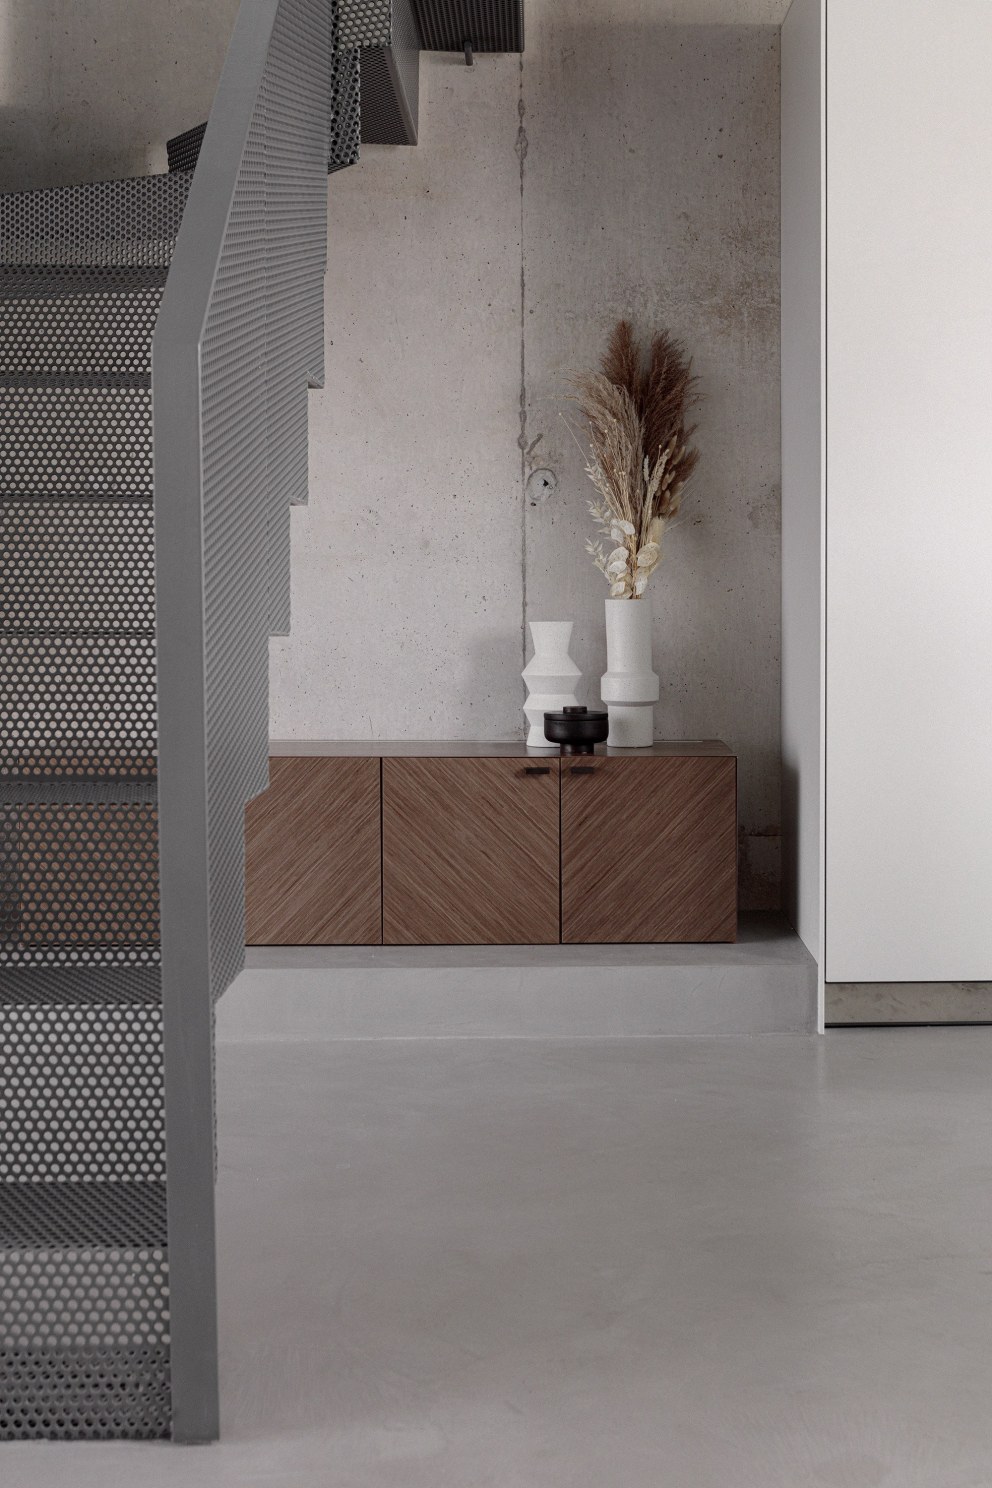 Wimbledon - New build home | Perforated metal staircase, bespoke joinery and exposed concrete wall | Interior Designers